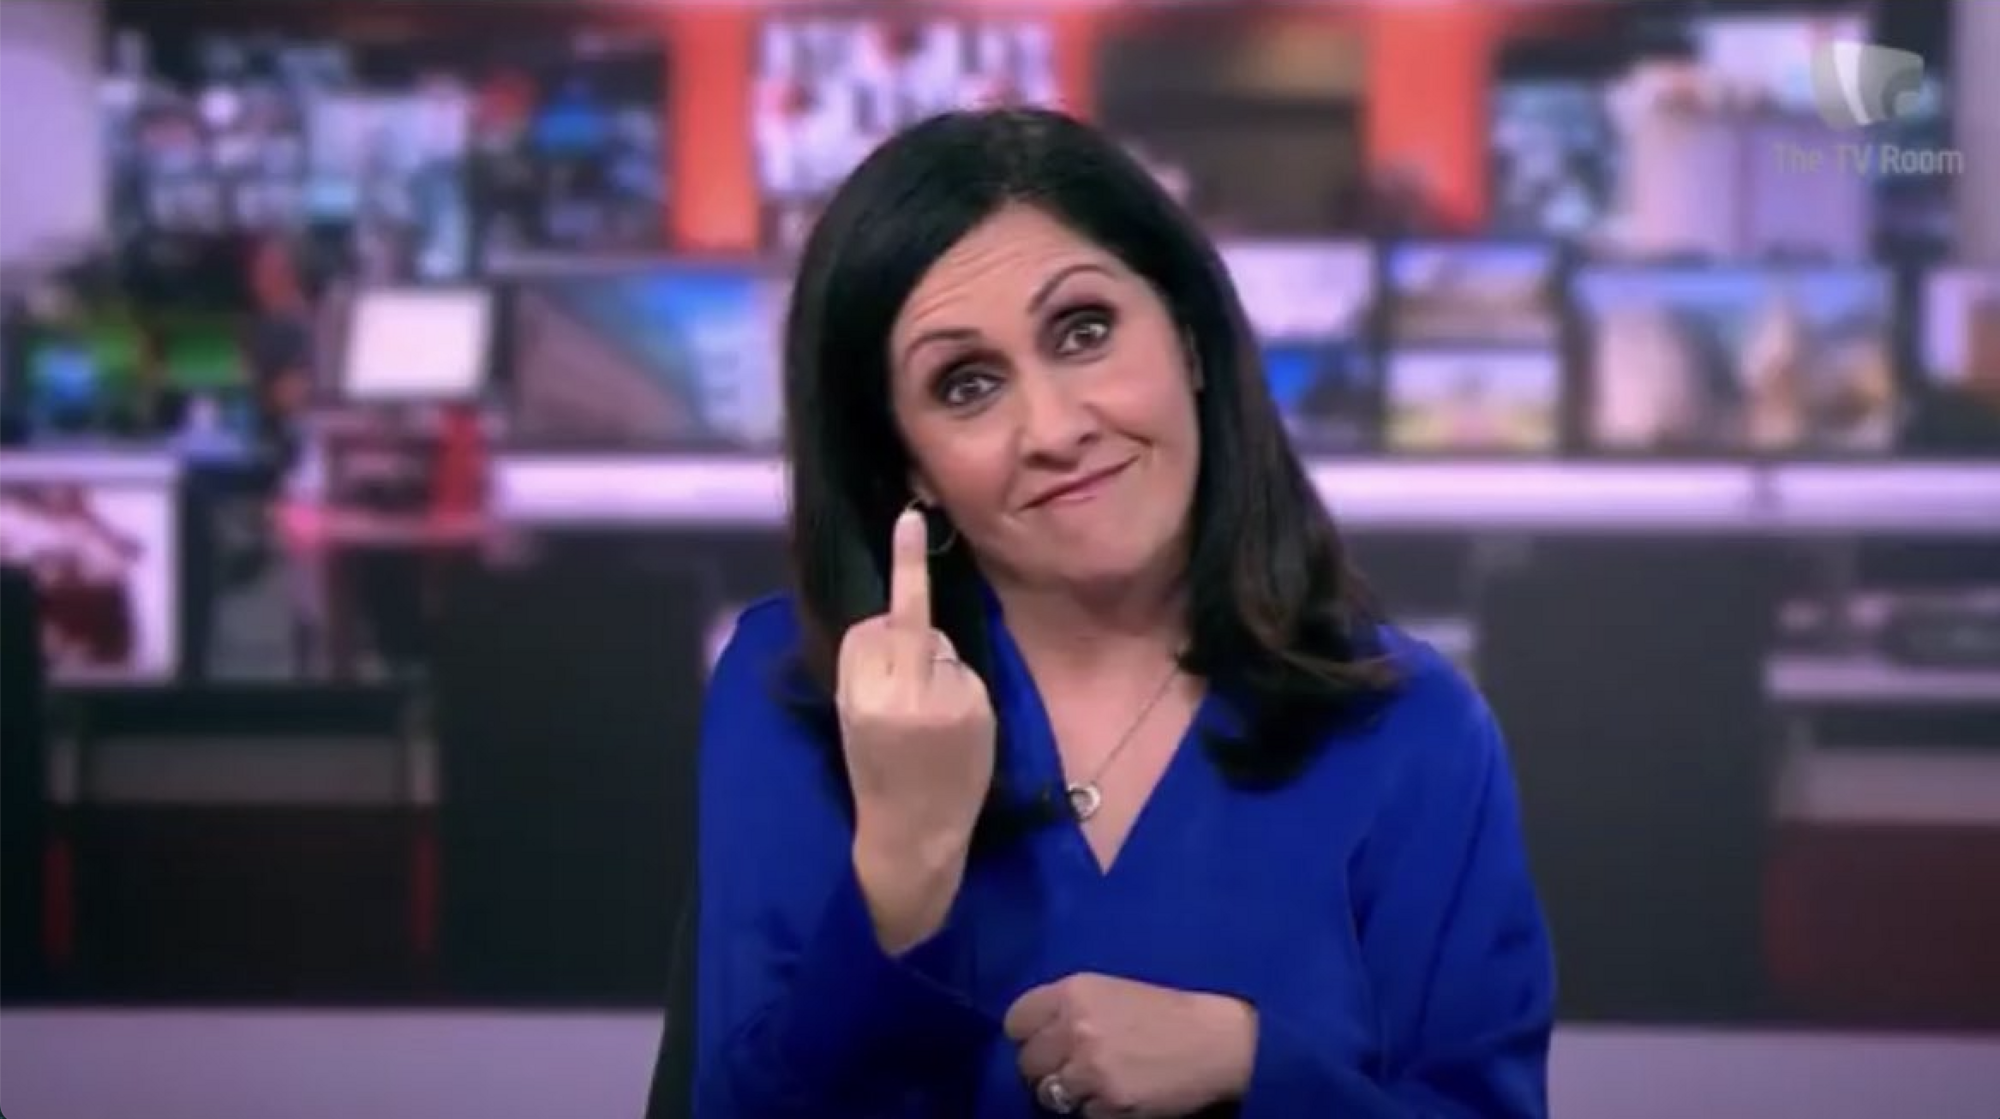 BBC TV presenter shows middle finger on air. Video